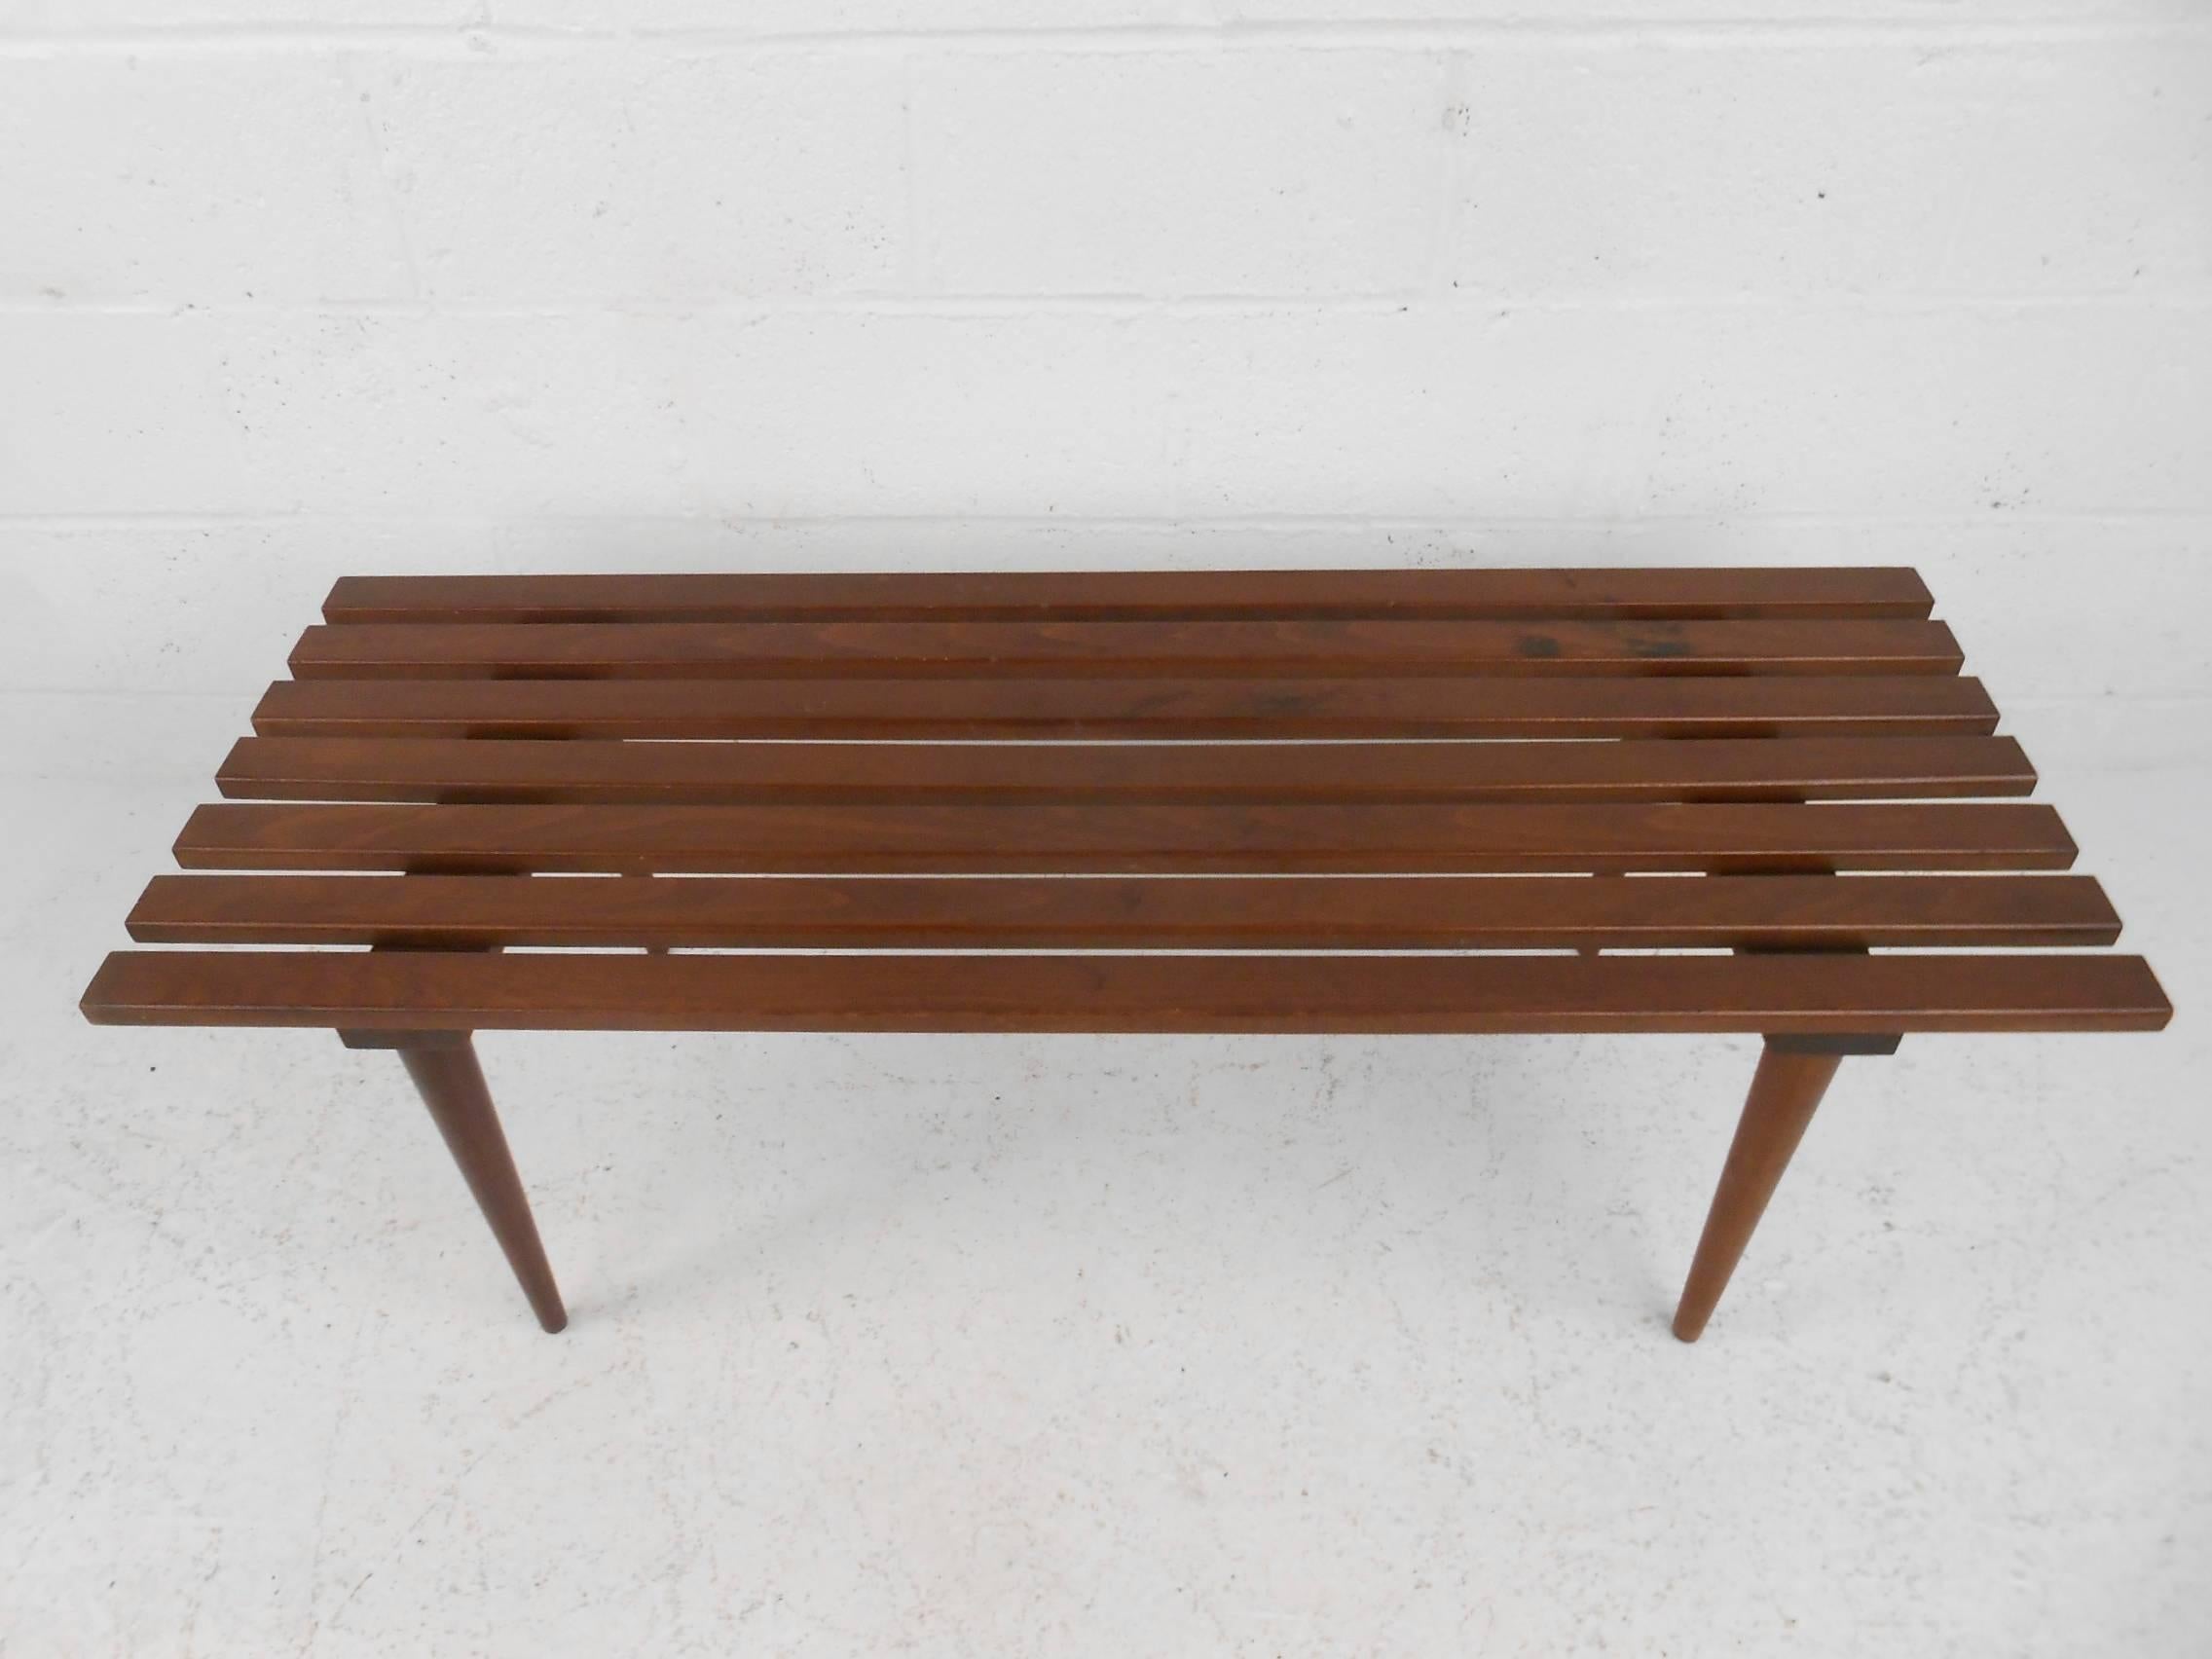 This beautiful vintage modern slat bench is made of solid walnut and features tapered legs. This unique midcentury bench makes the perfect addition to any modern interior. Please confirm item location (NY or NJ).